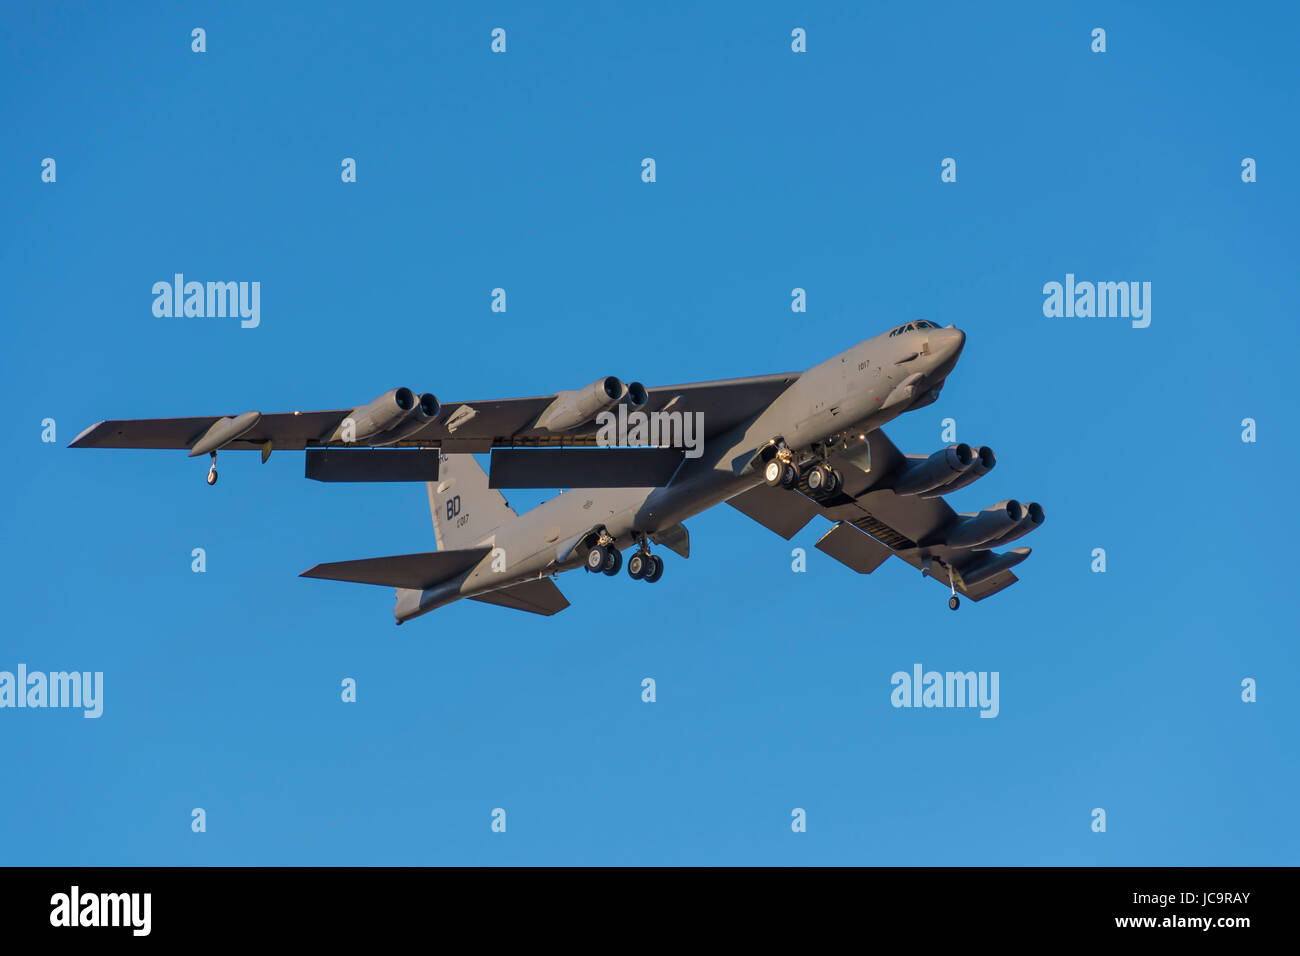 BOSSIER CITY, LOUISIANA, U.S.A.-Jan.24, 2017: A U.S. Air Force B 52 bomber, assigned to the Air Force Global Strike Command's Eighth Air Force. Stock Photo